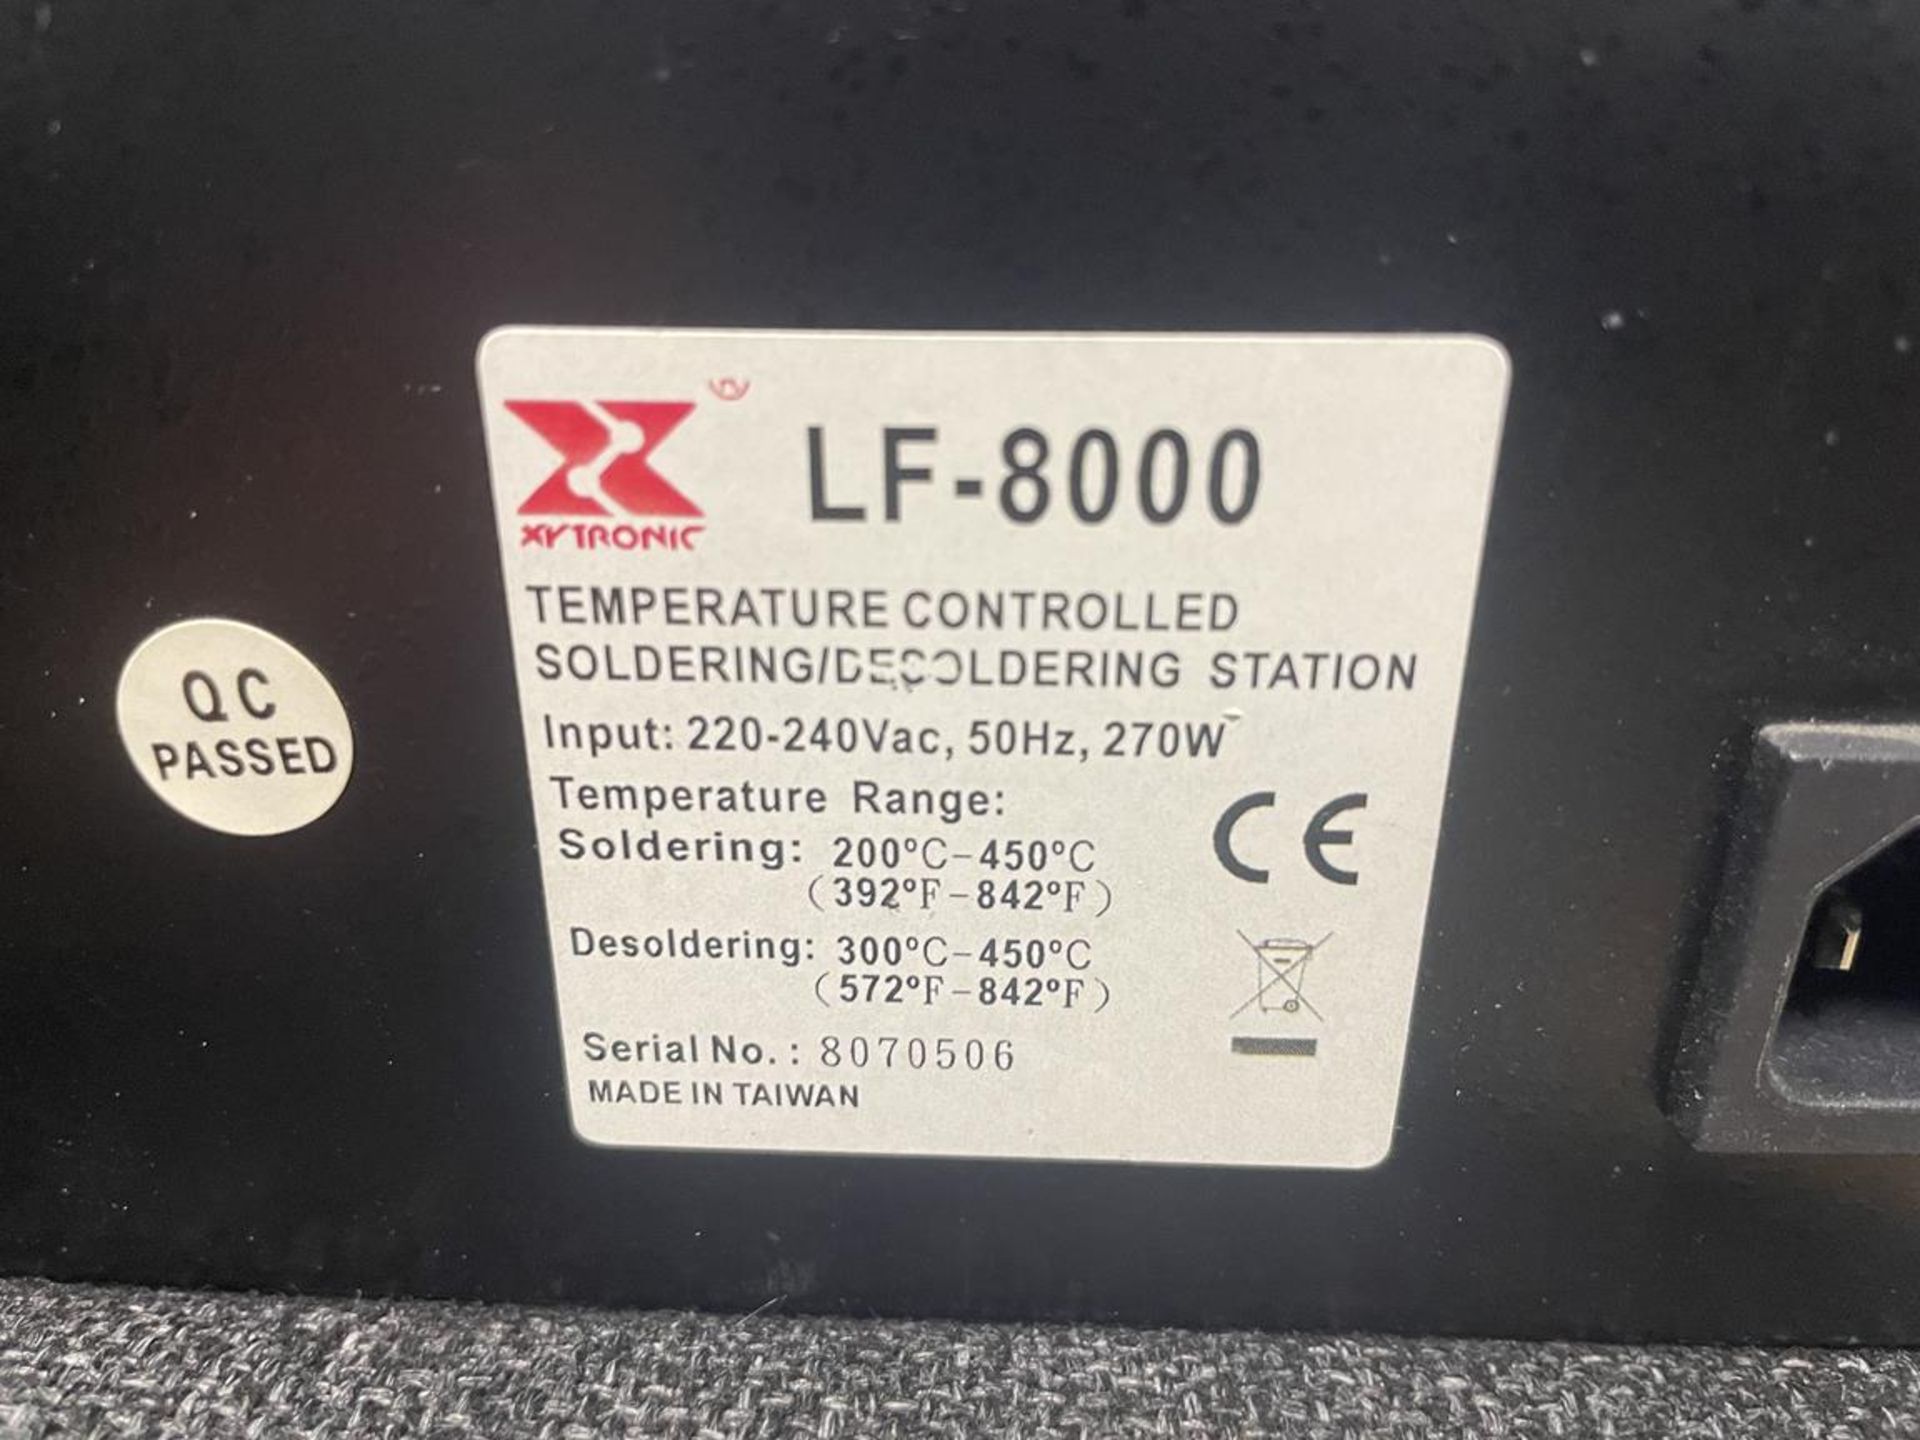 LF-8000 Temperature Controlled Soldering/Desoldering Station S/No. 8070506 (GB REF#59) - Image 2 of 2